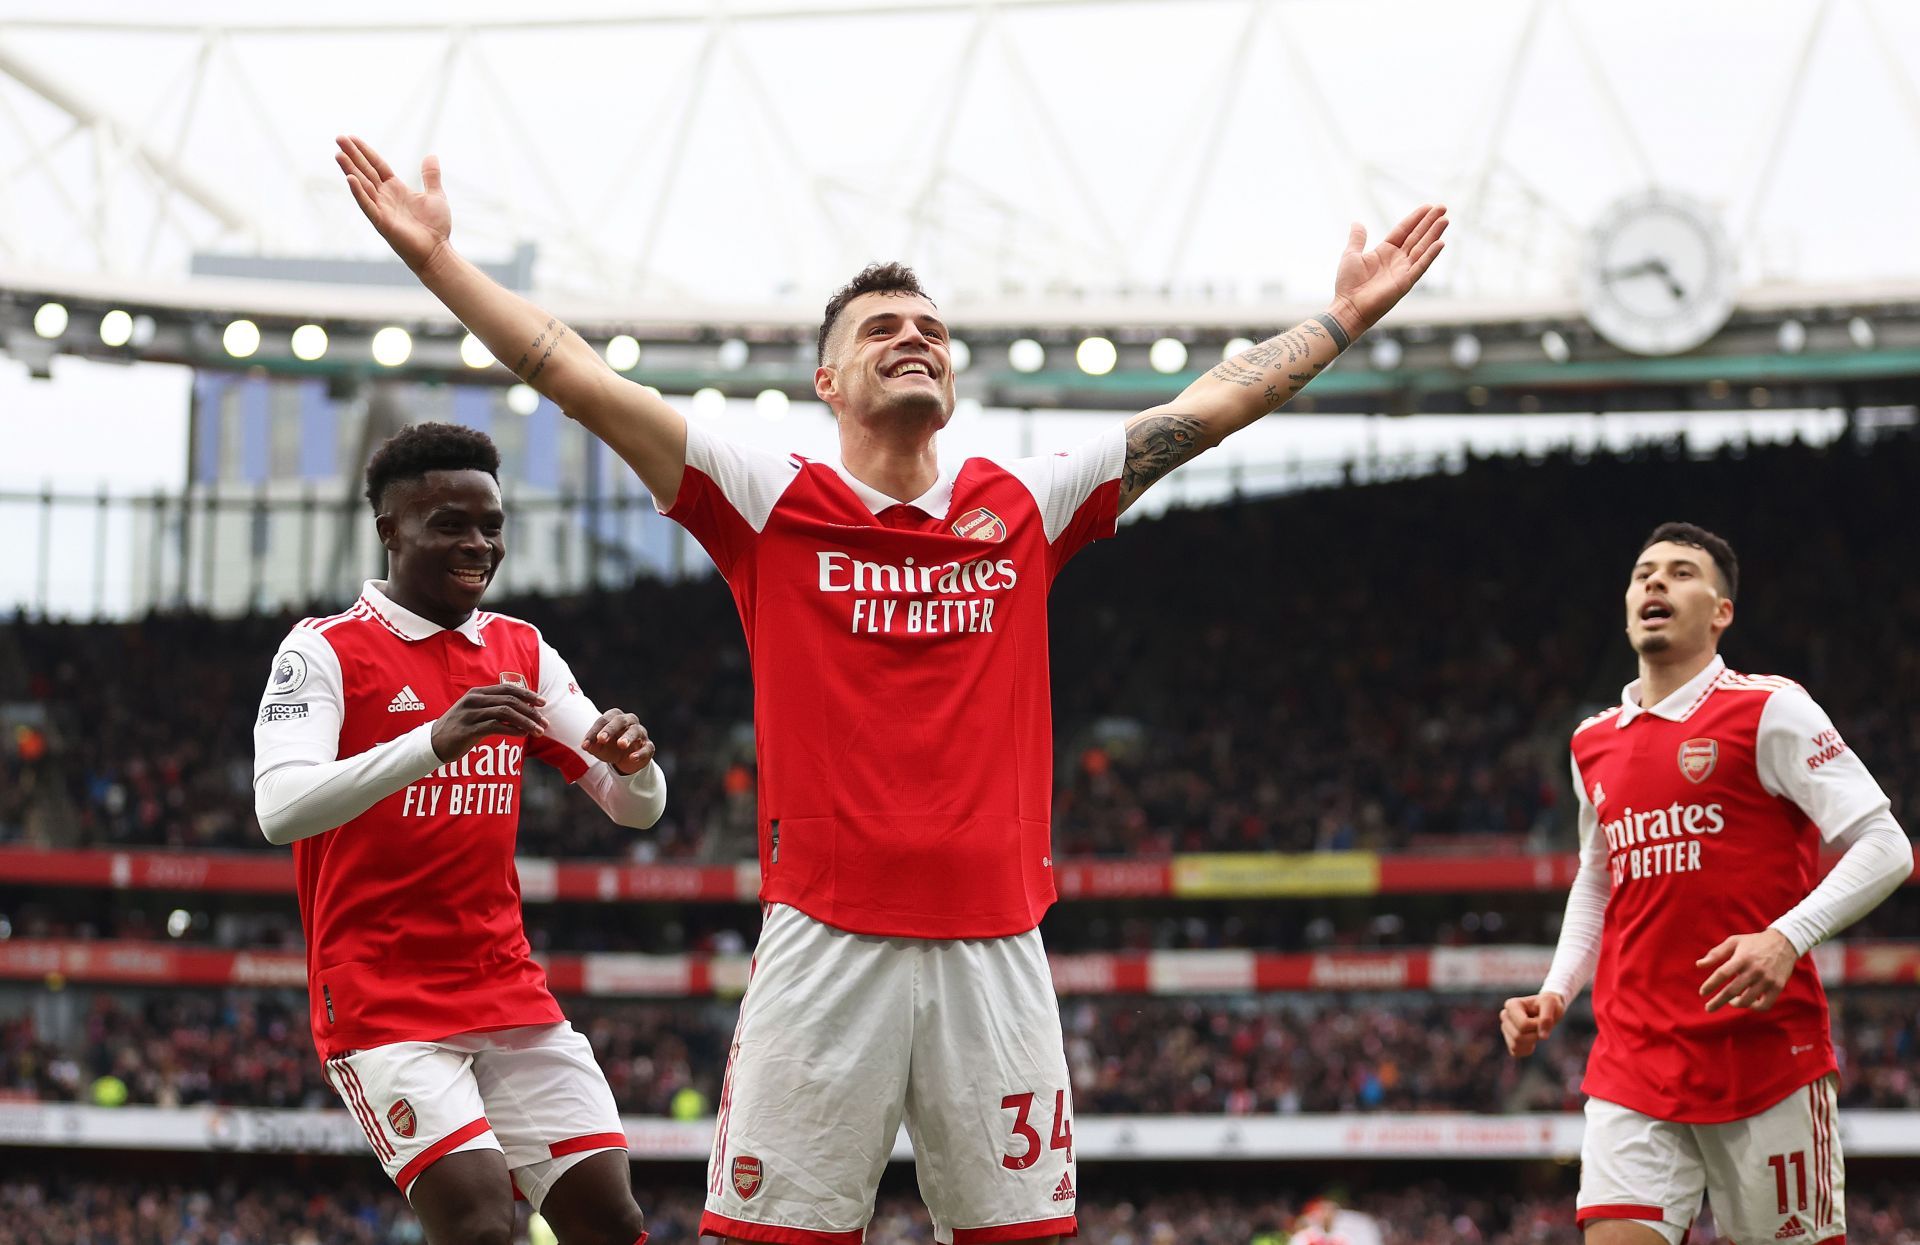 Arsenal have won seven league games in a row.